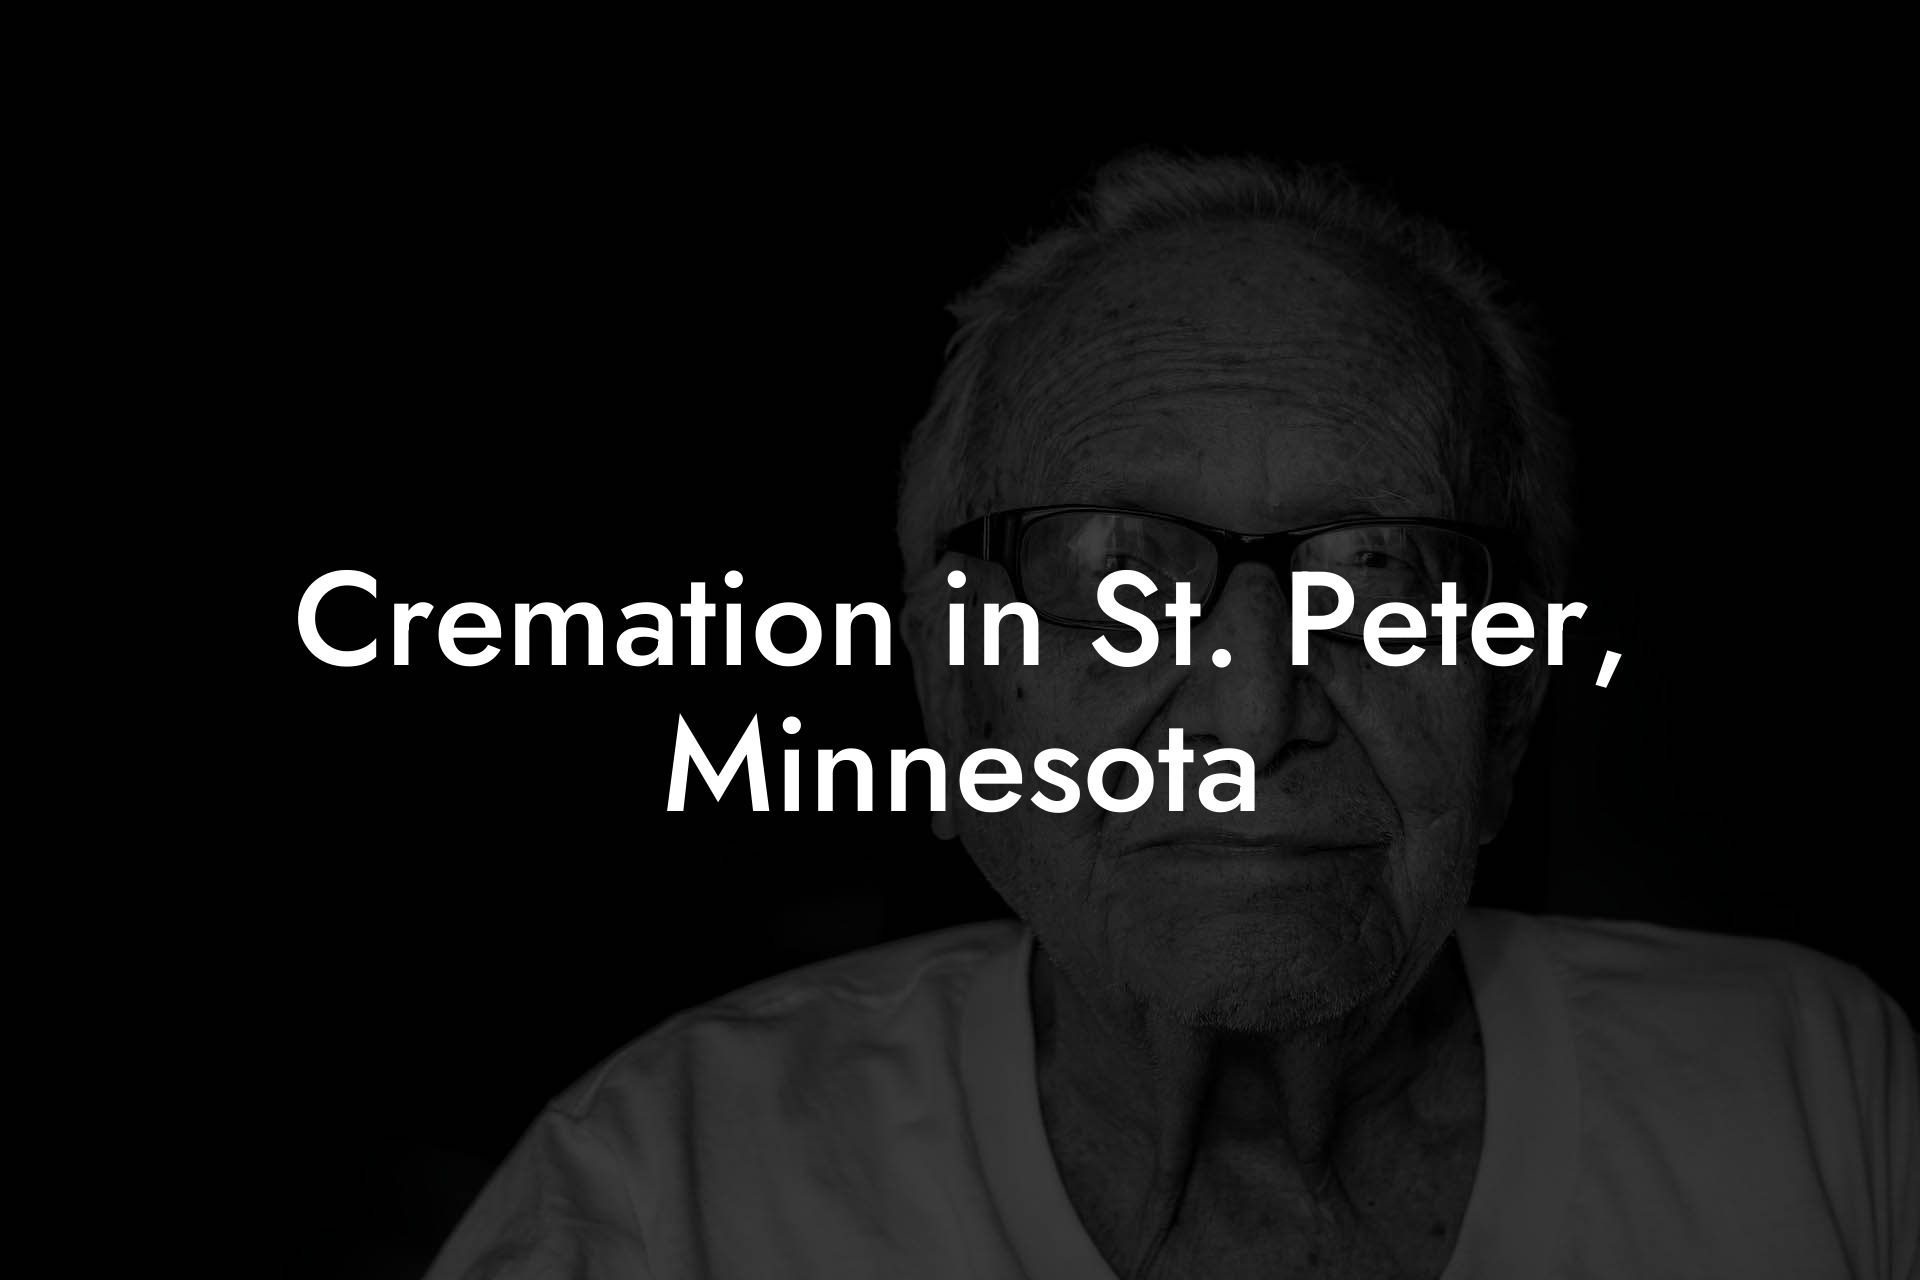 Cremation in St. Peter, Minnesota